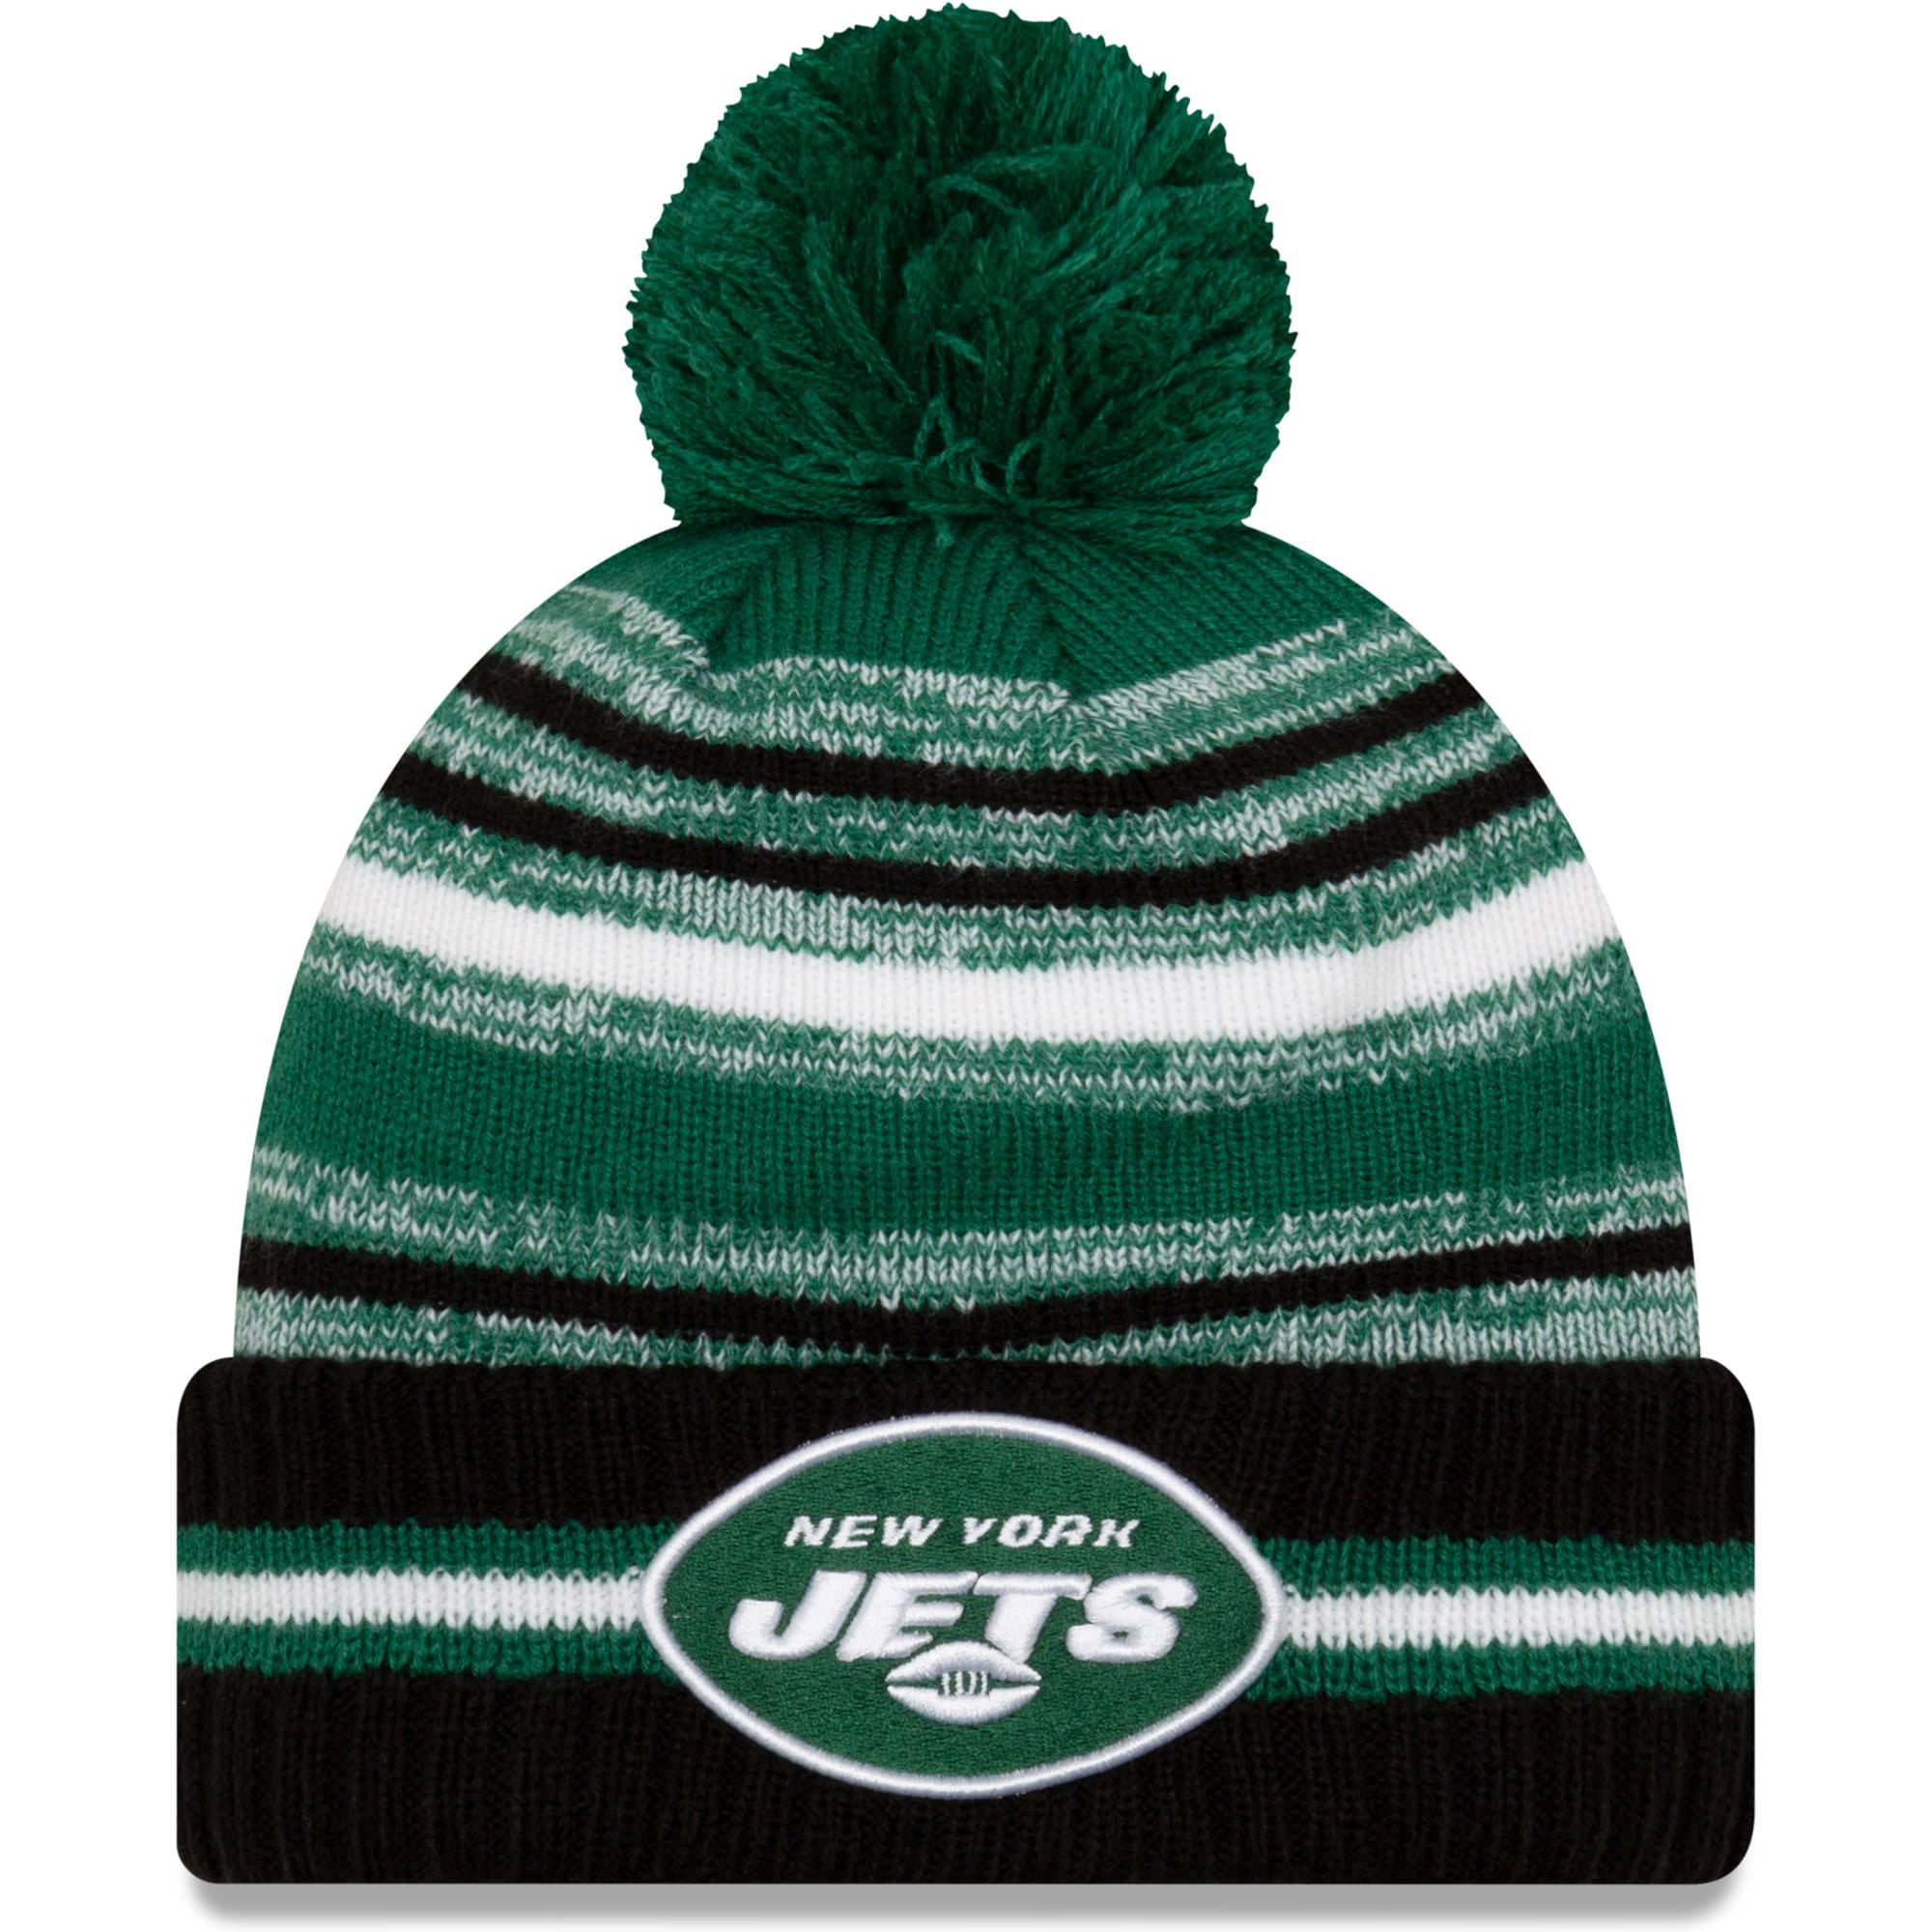 New York Jets Retro Sideline Cold Weather Cuffed Knit Beanie Cap Hat Green TOB 